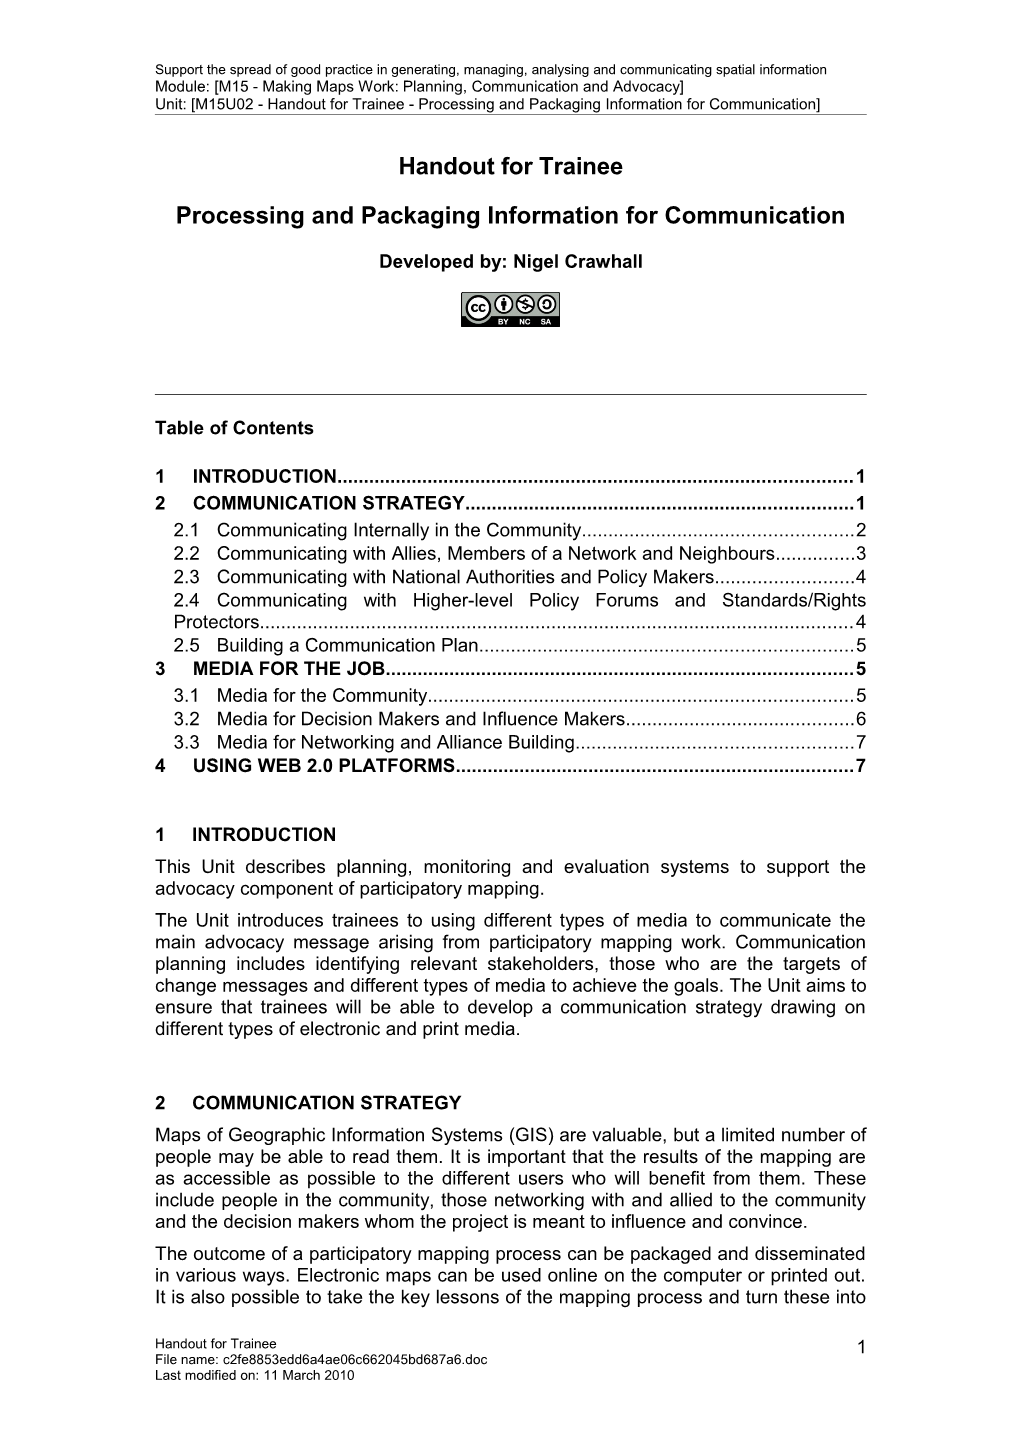 Handout for Trainee - Processing and Packaging Information for Communication